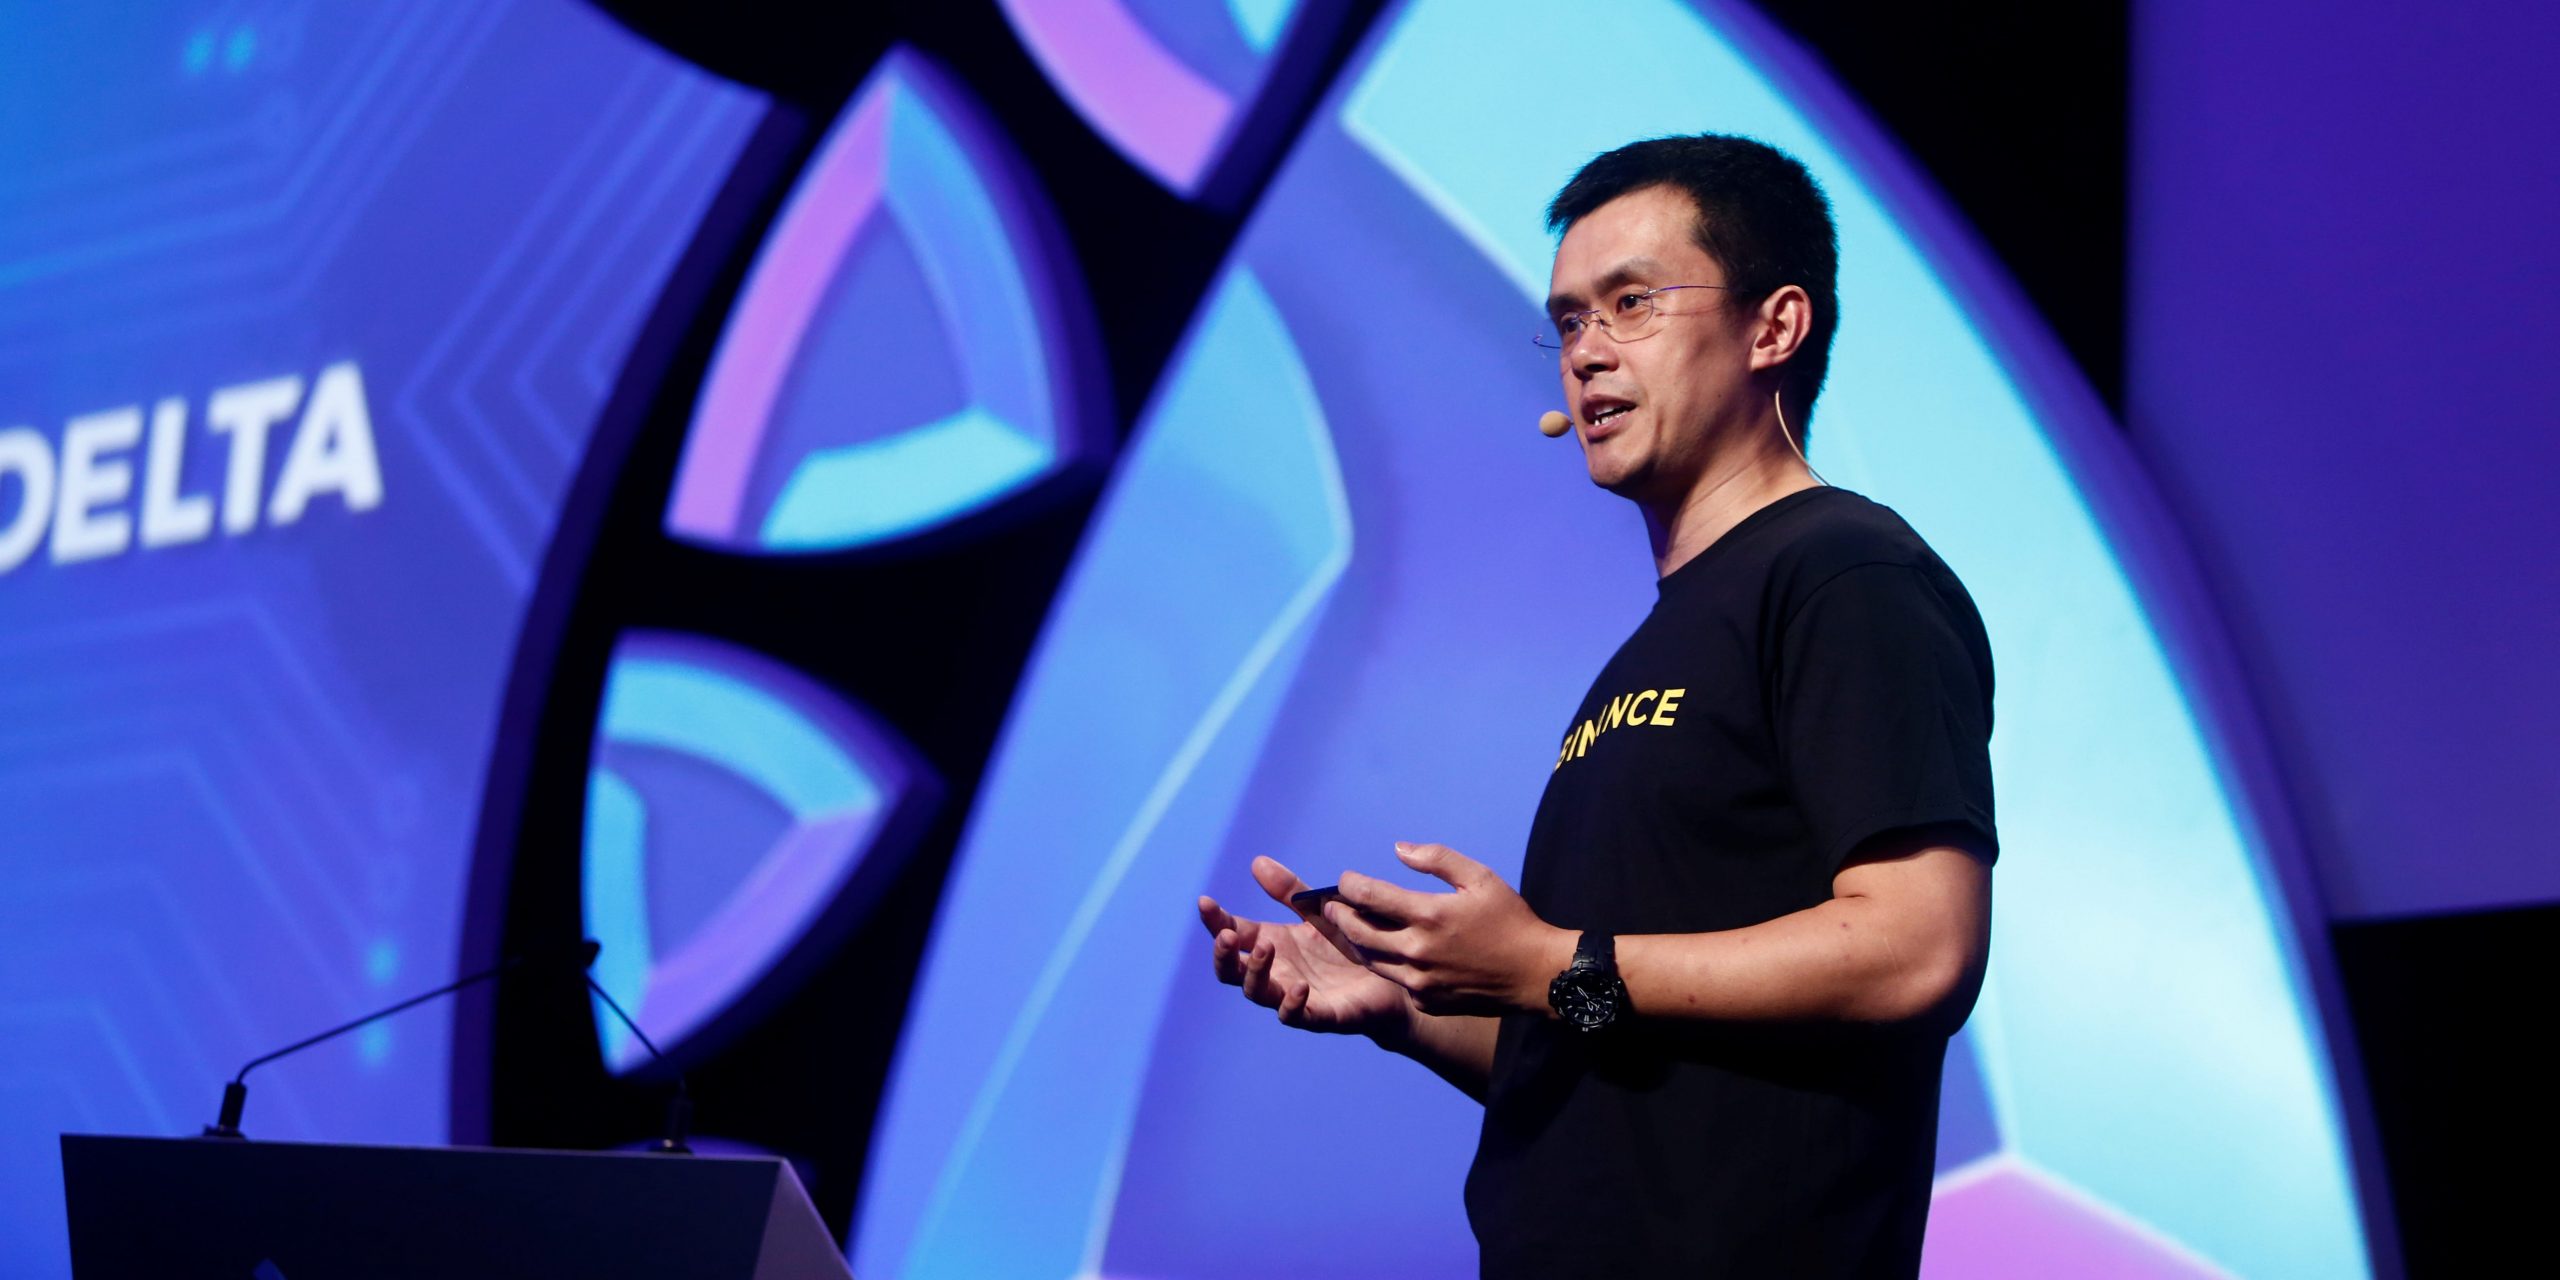 Changpeng Zhao, CEO of Binance, speaks at the Delta Summit, Malta's official Blockchain and Digital Innovation event promoting cryptocurrency, in St Julian's, Malta October 4, 2018.